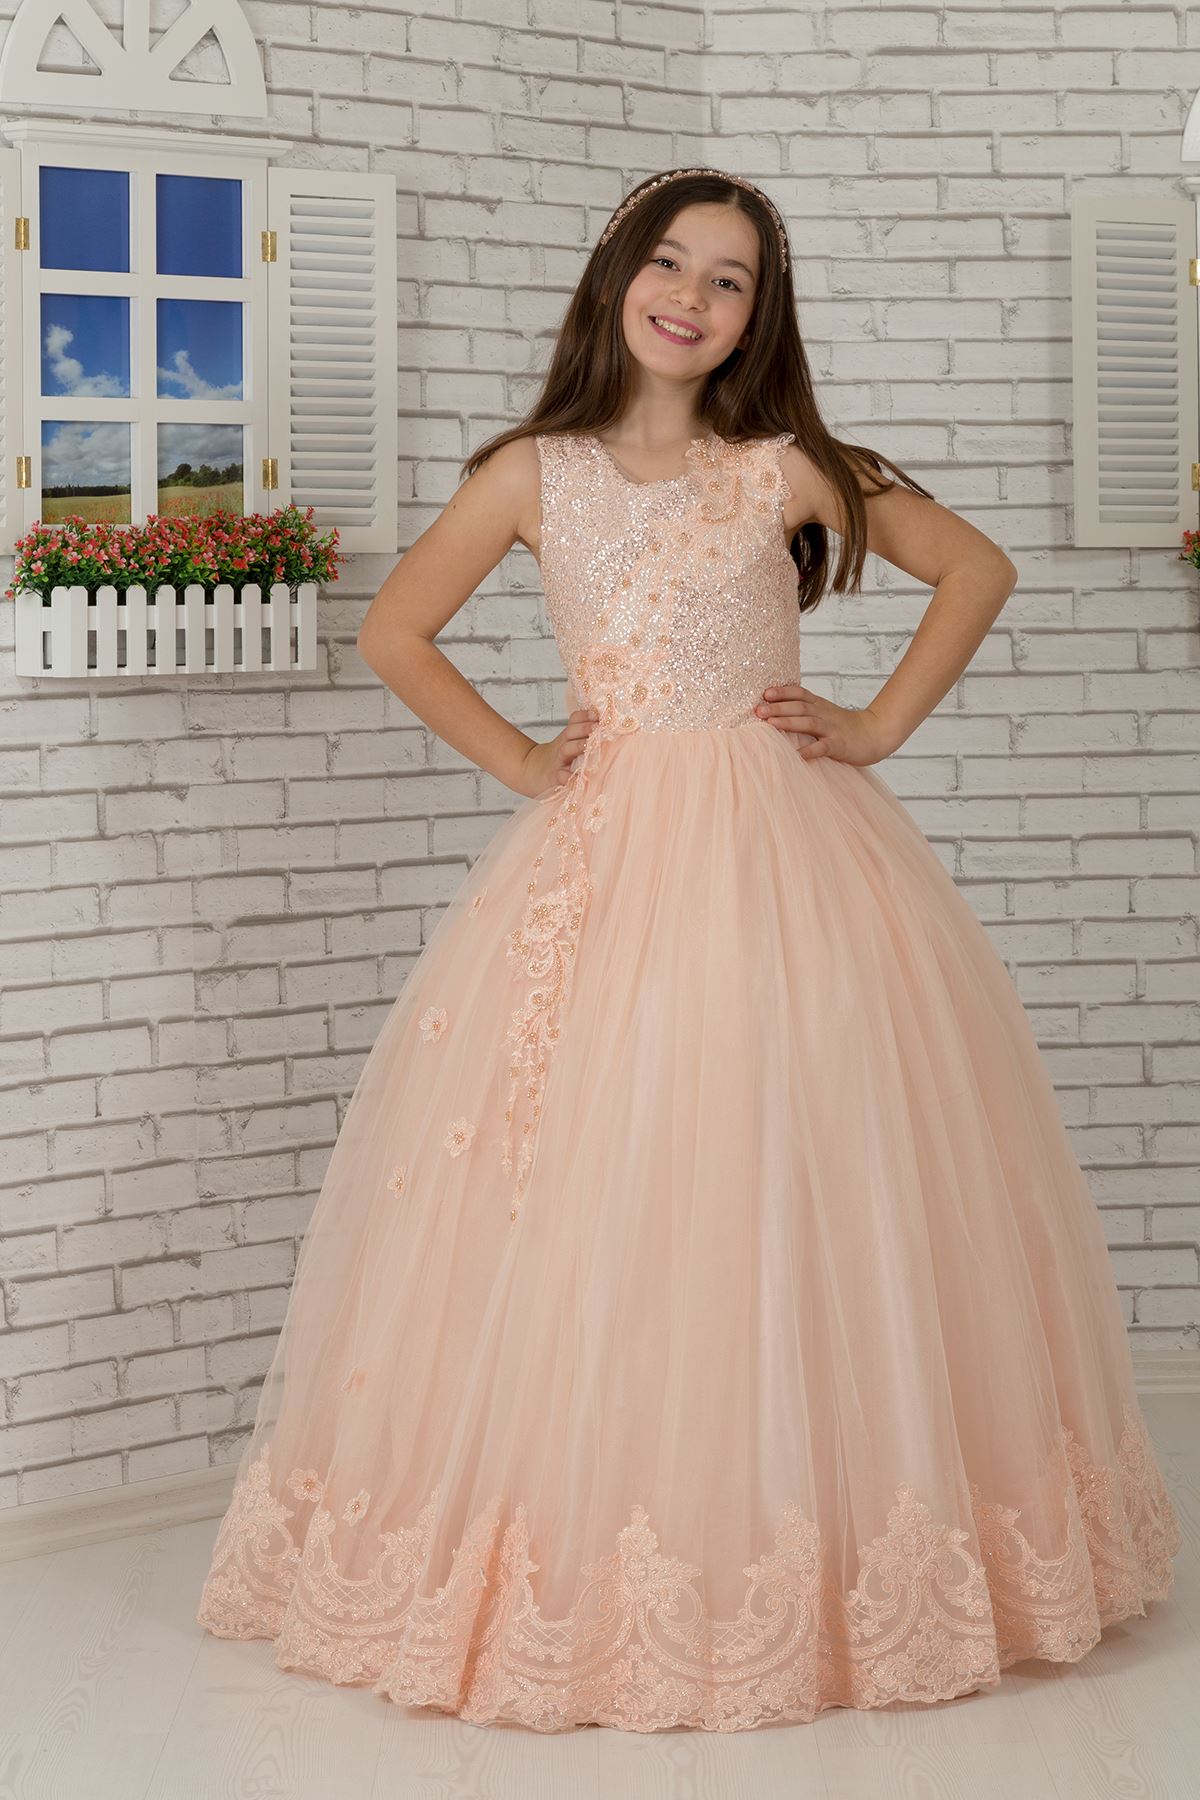 Special sequin body, embroidered appliqué, hemline detailed Fluffy Girl's Evening Dress 600 Salmon